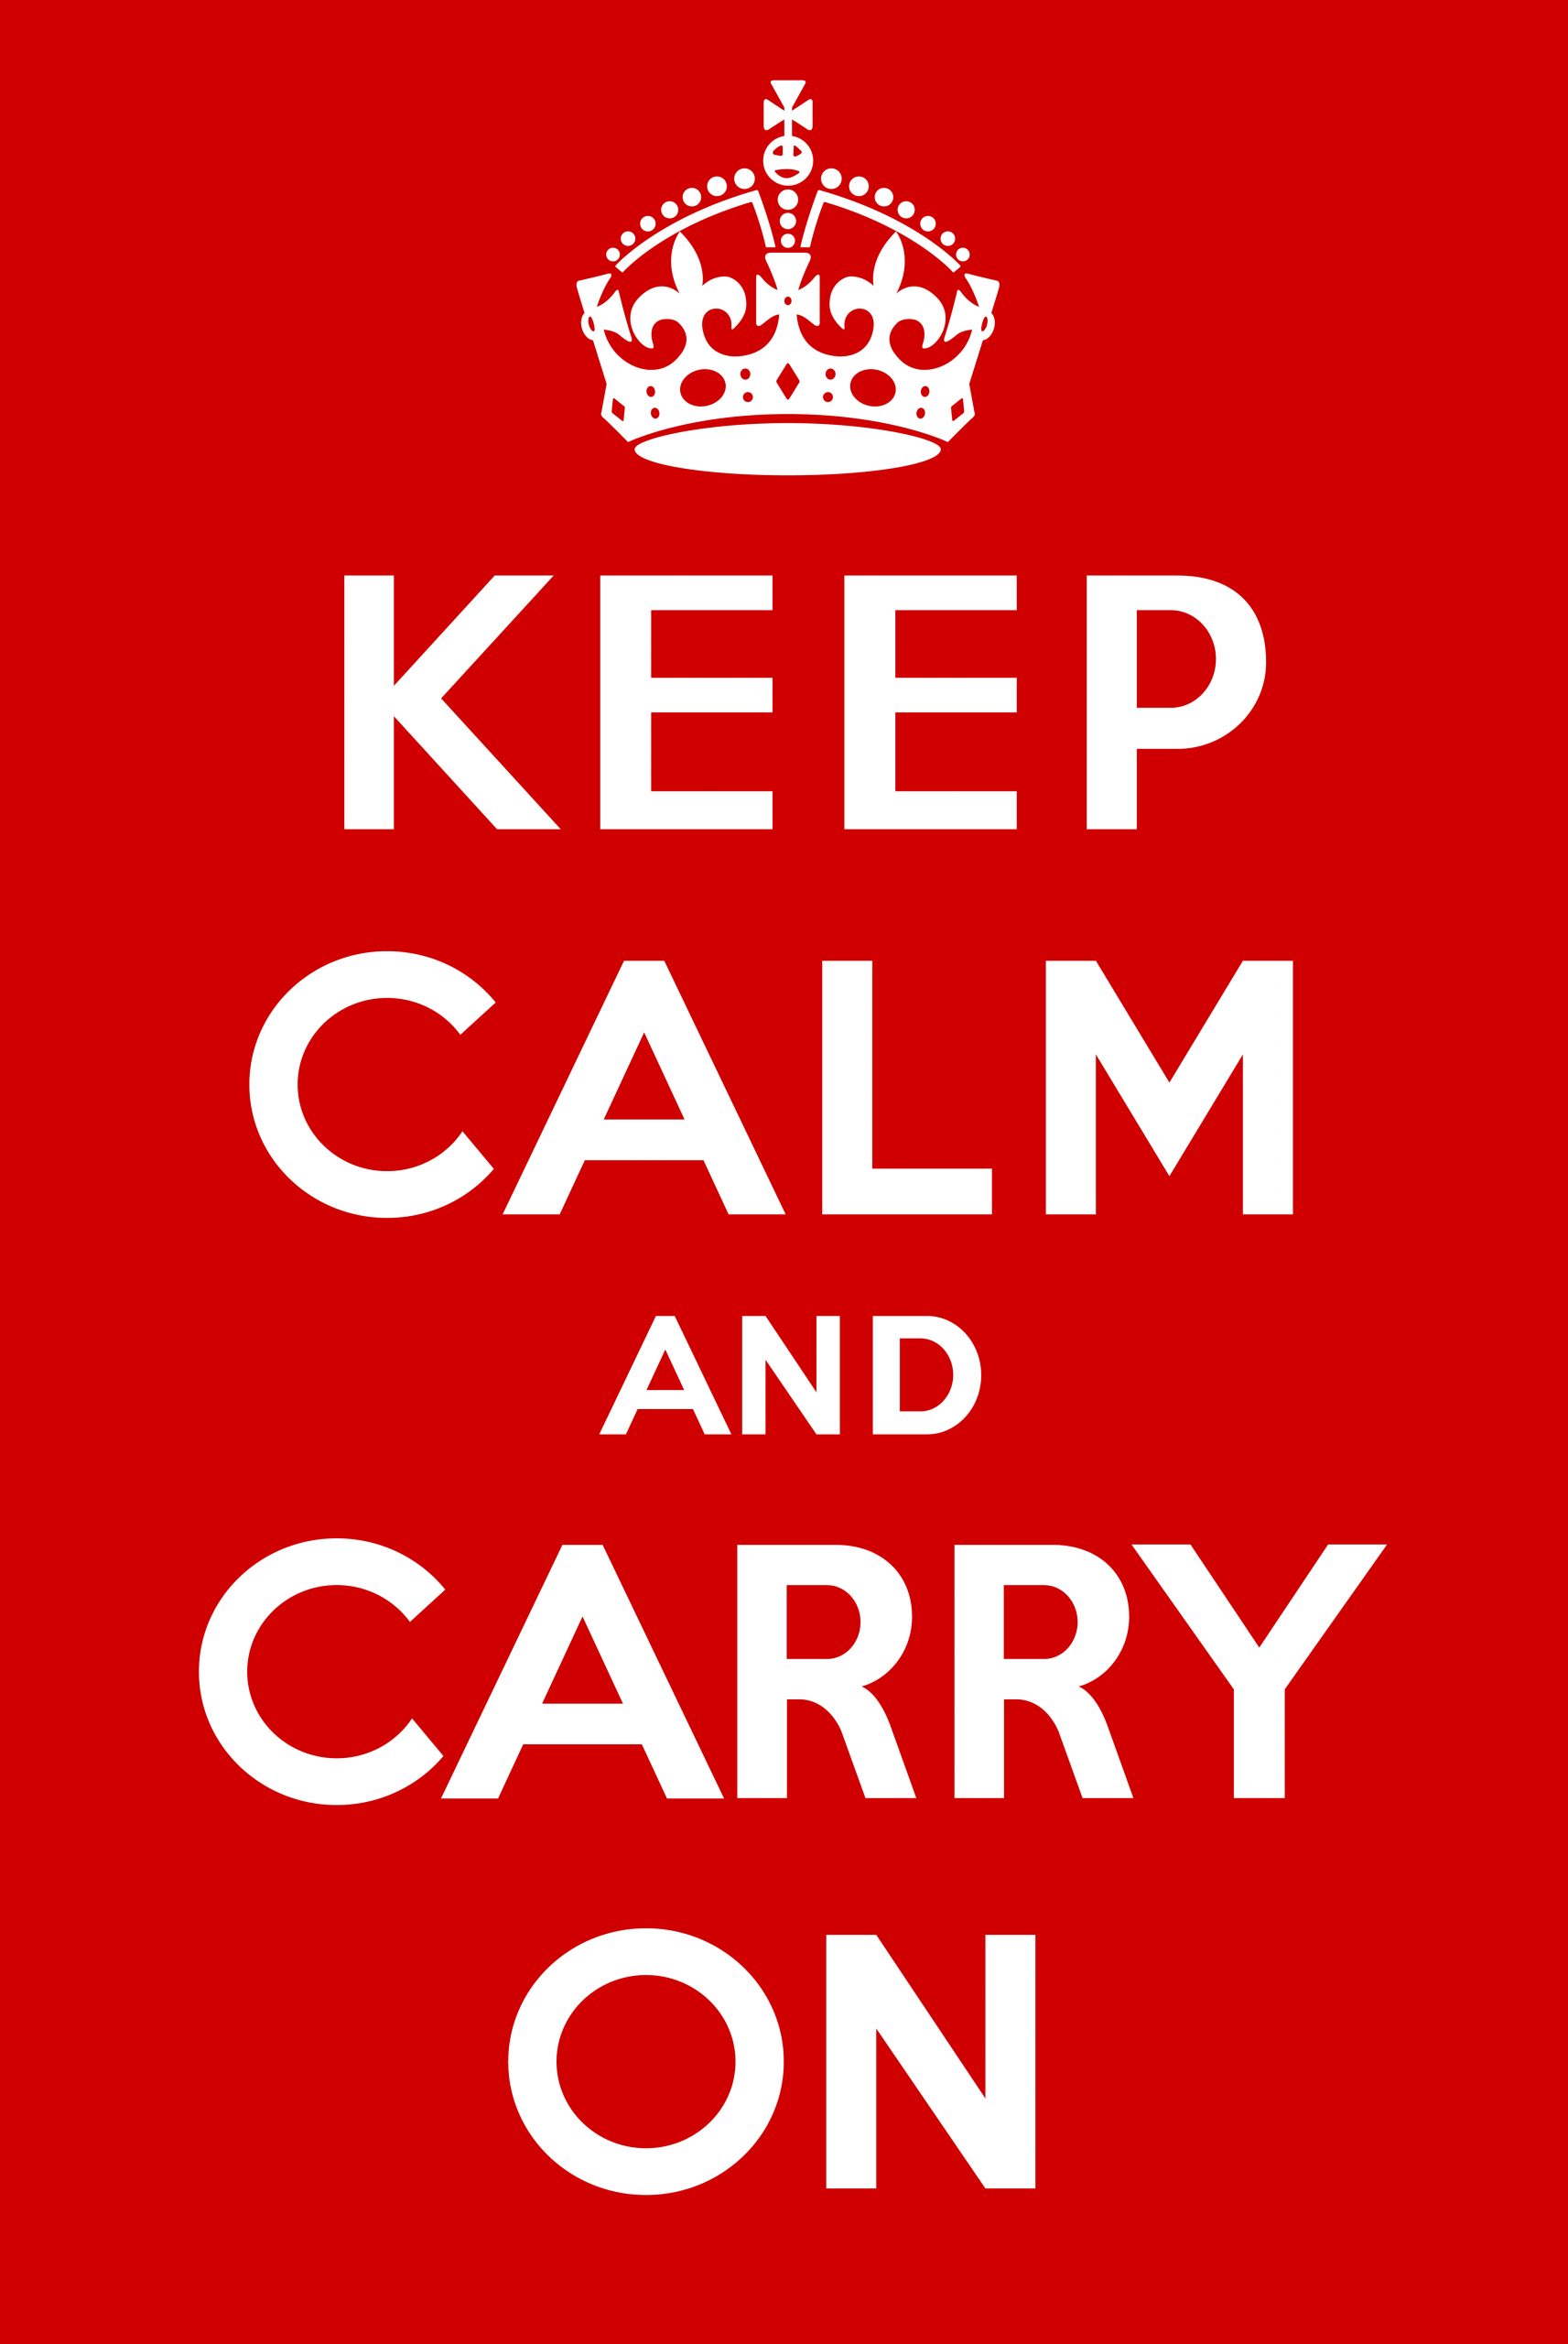 https://depositphotos.com/10314123/stock-illustration-keep-calm-and-carry-on.html